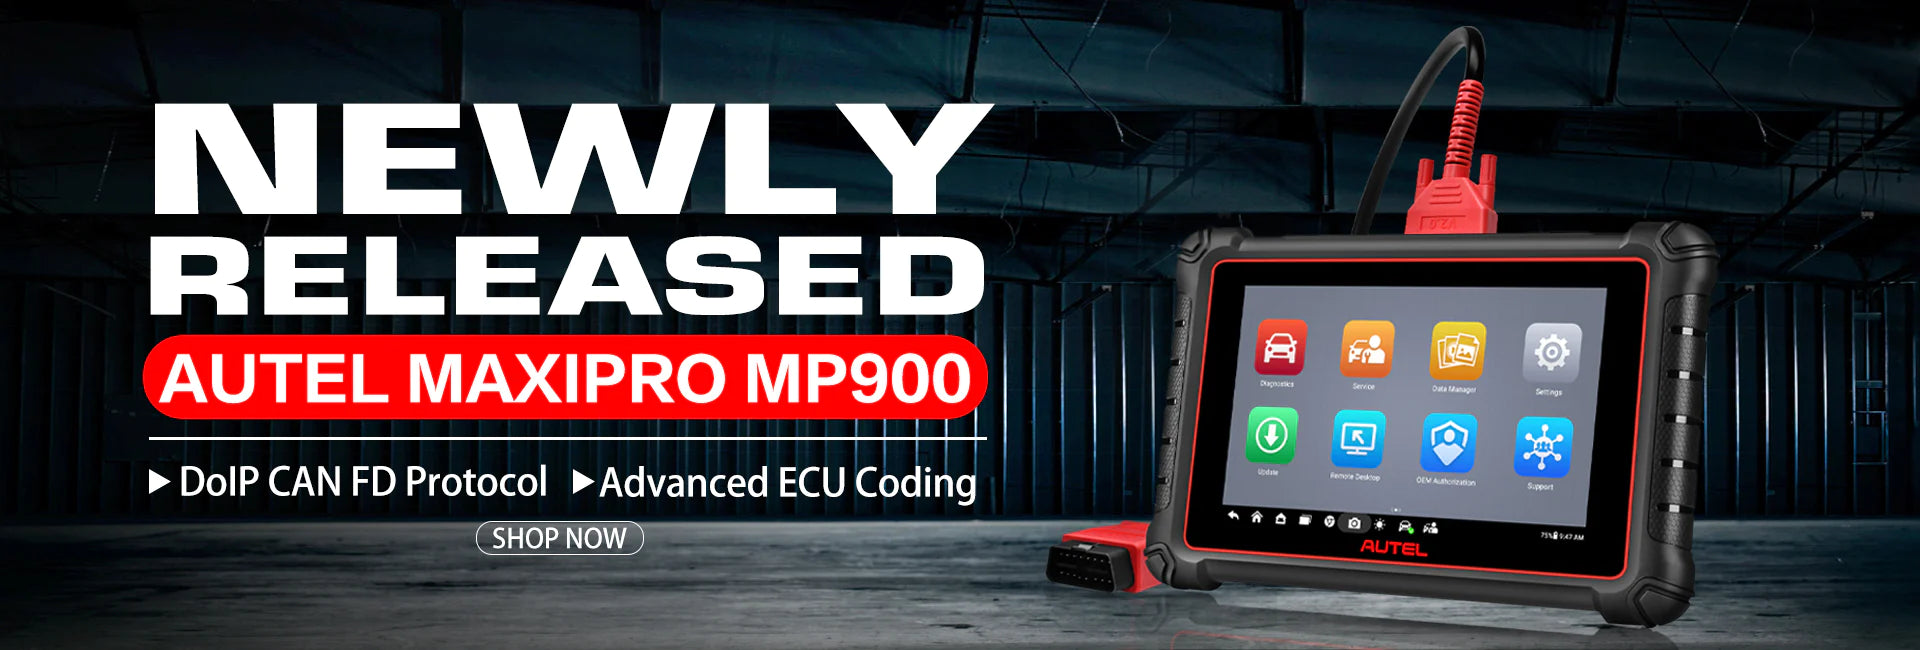 MP900 New Product